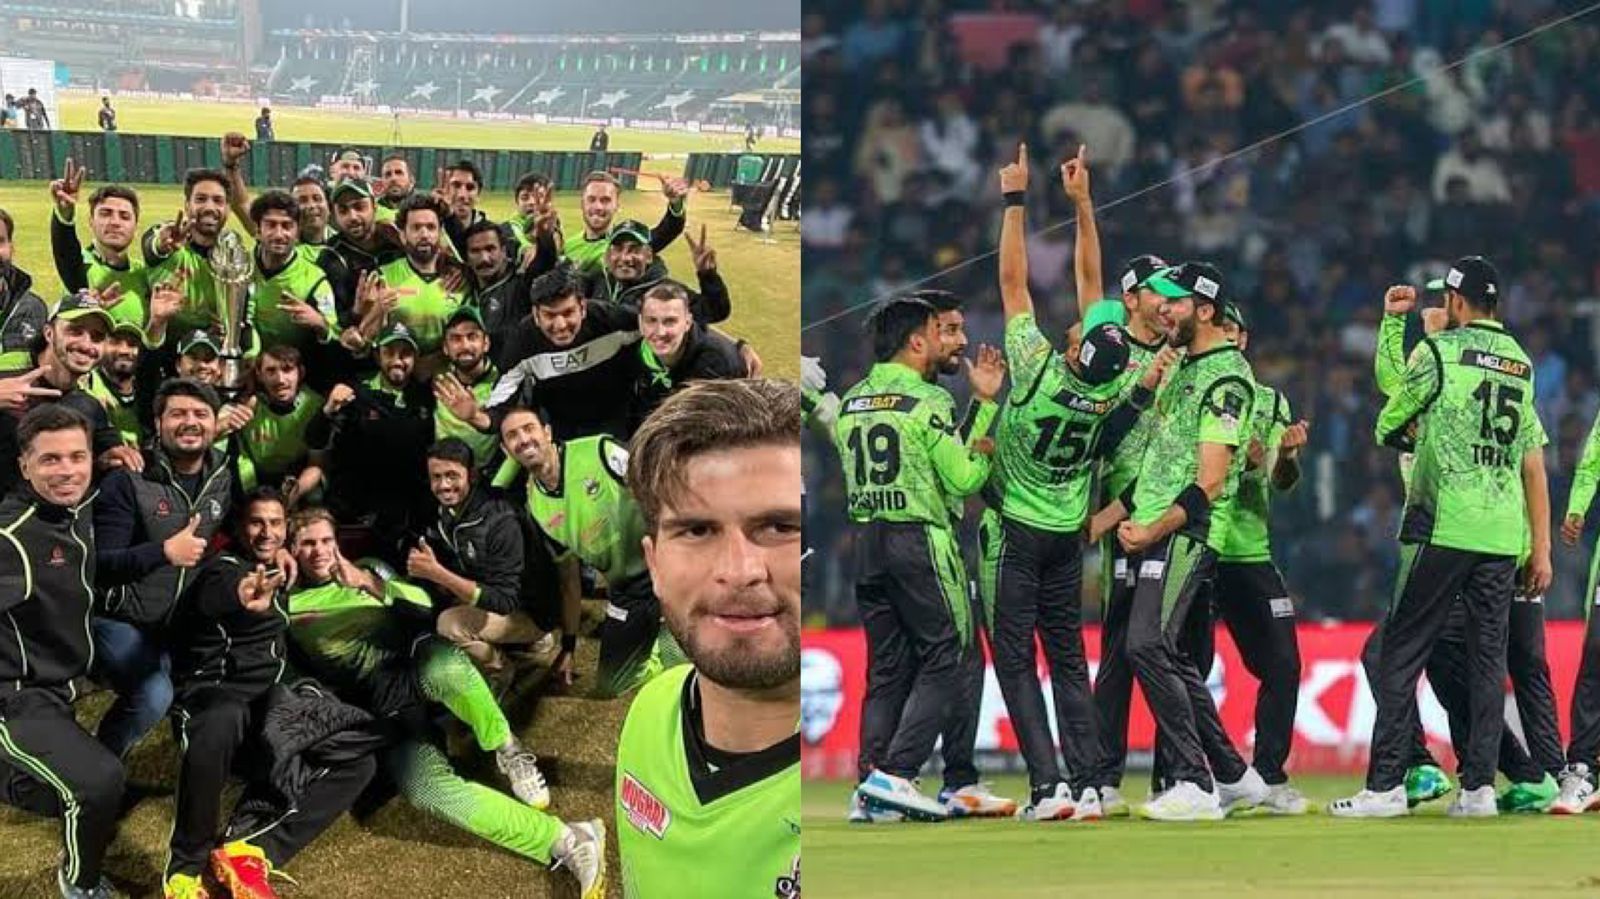 Lahore Qalandars are two-time defending champions of PSL 